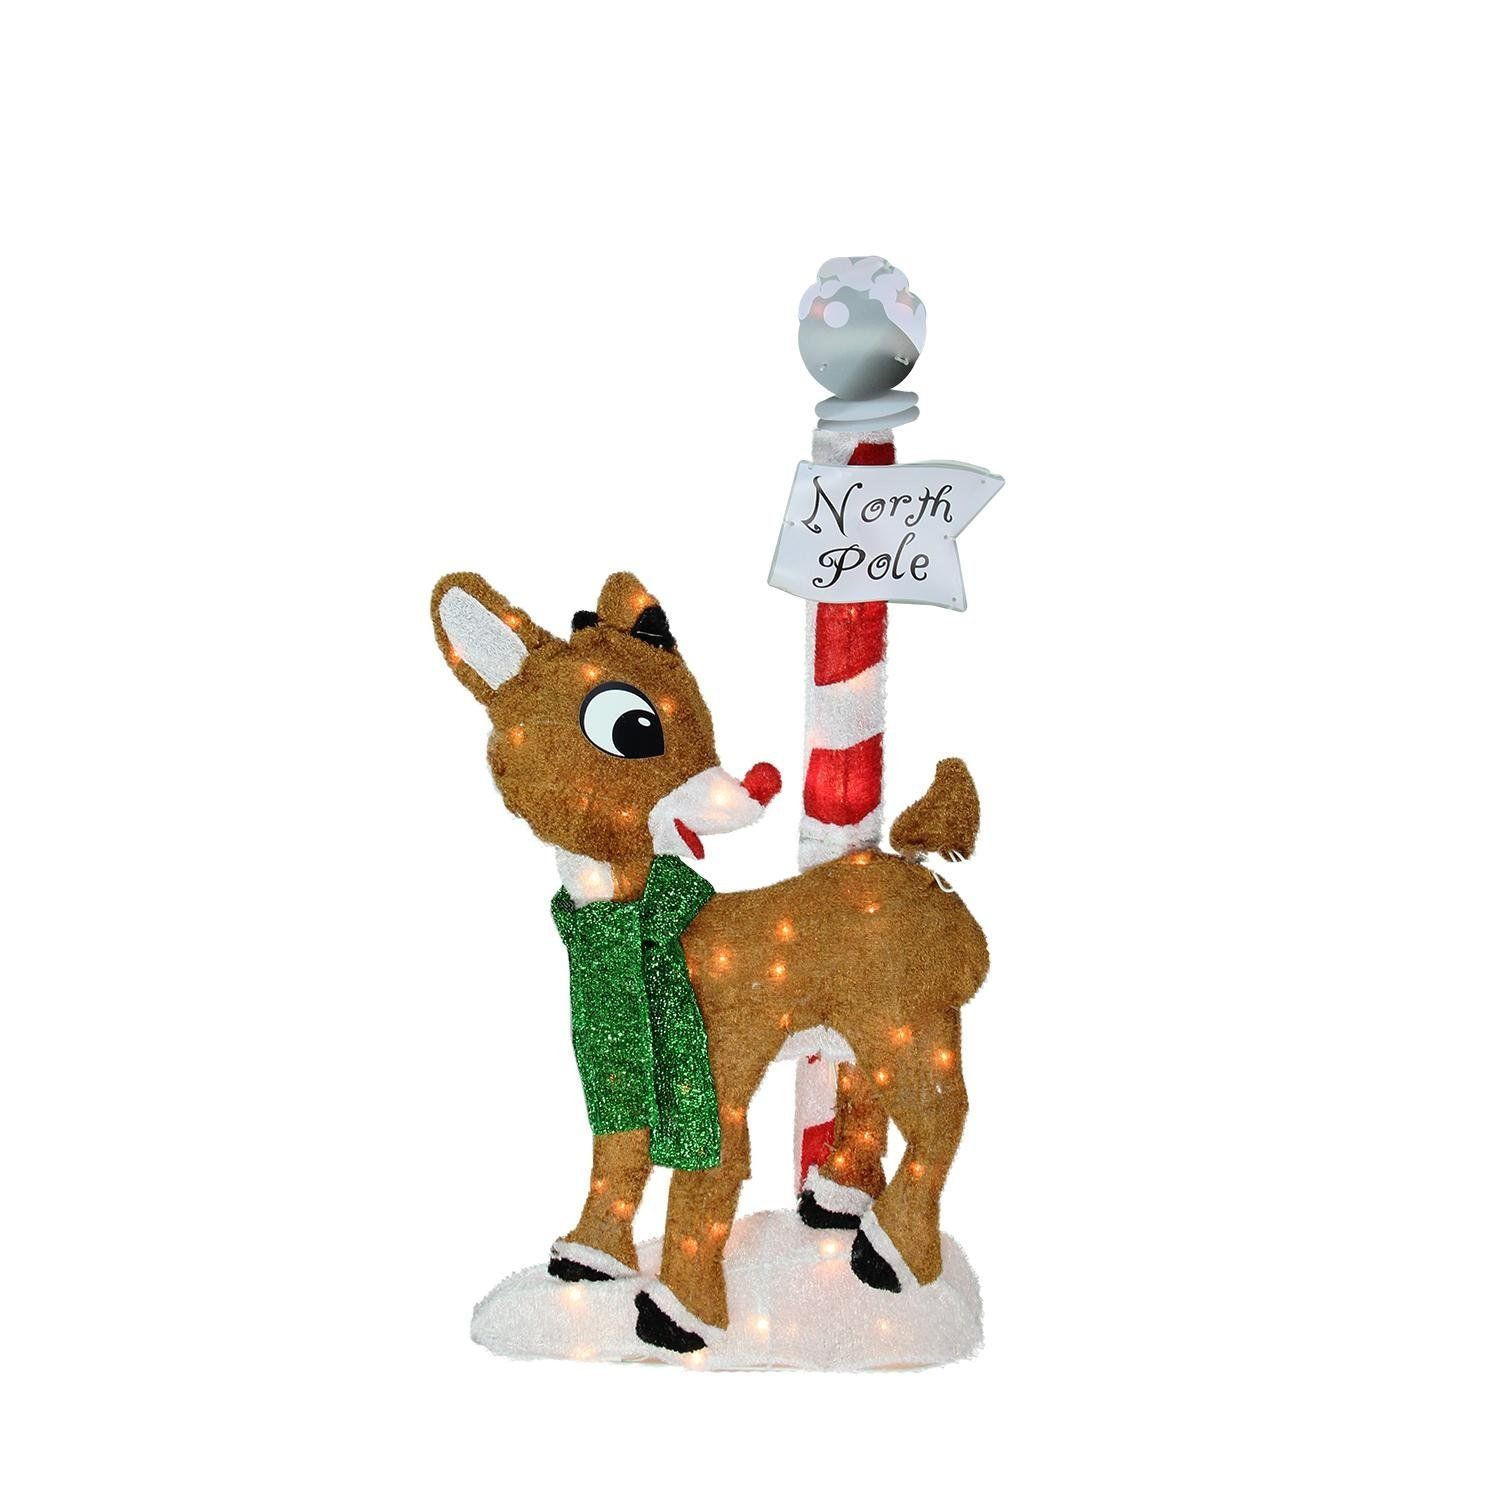 32" Pre-Lit 2-D Rudolph with North Pole